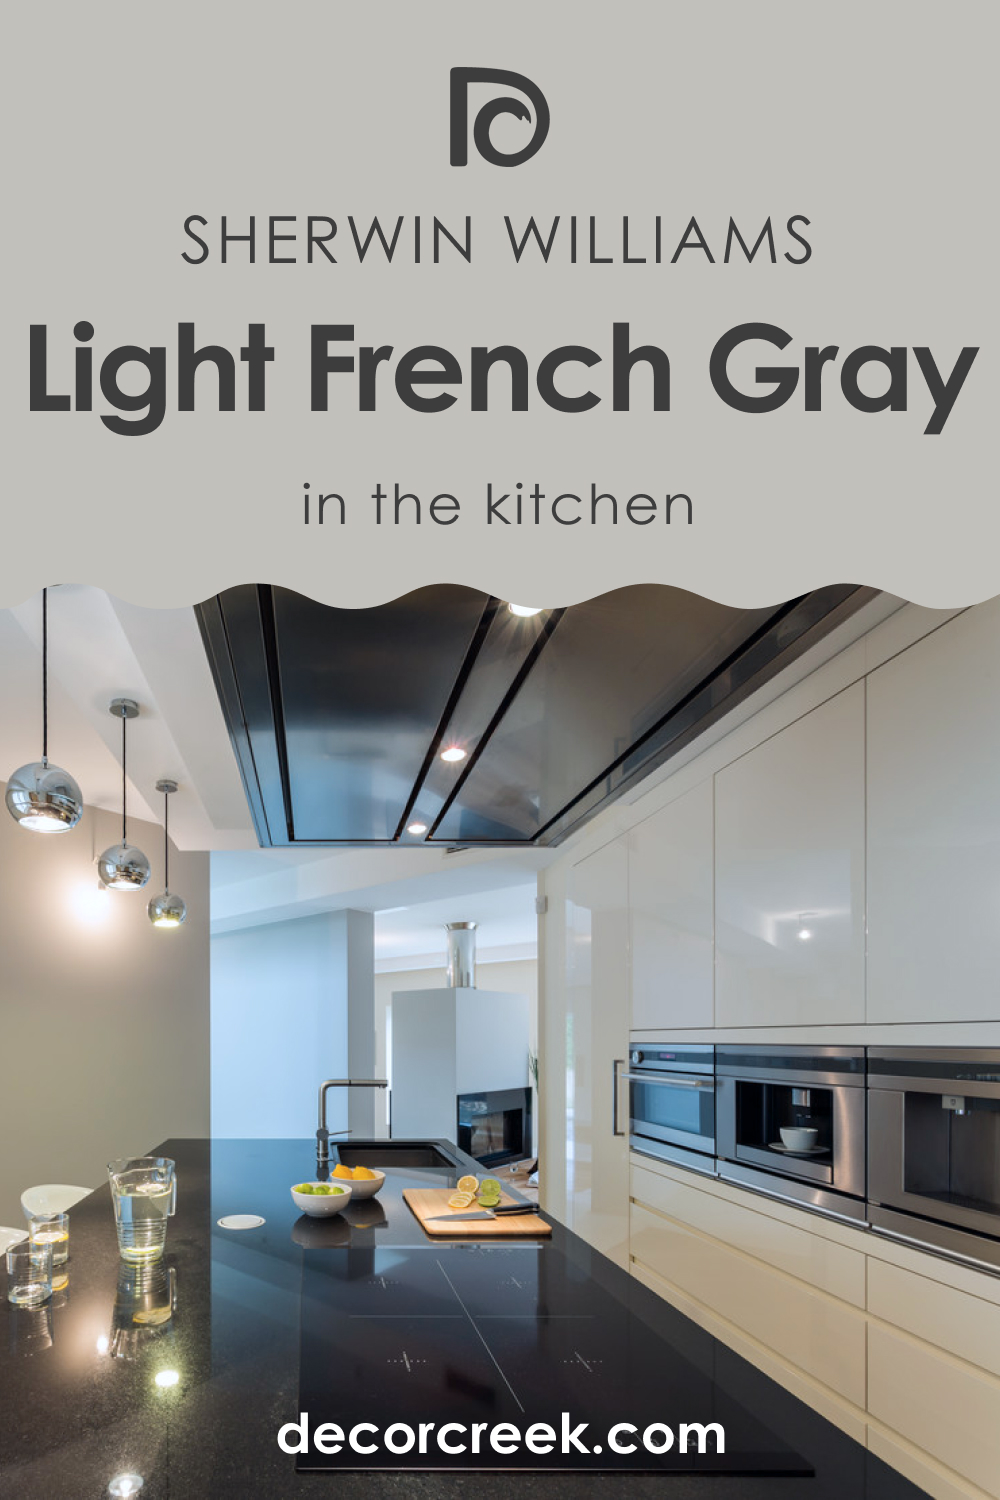 How to Use SW 0055 Light French Gray for the Kitchen?